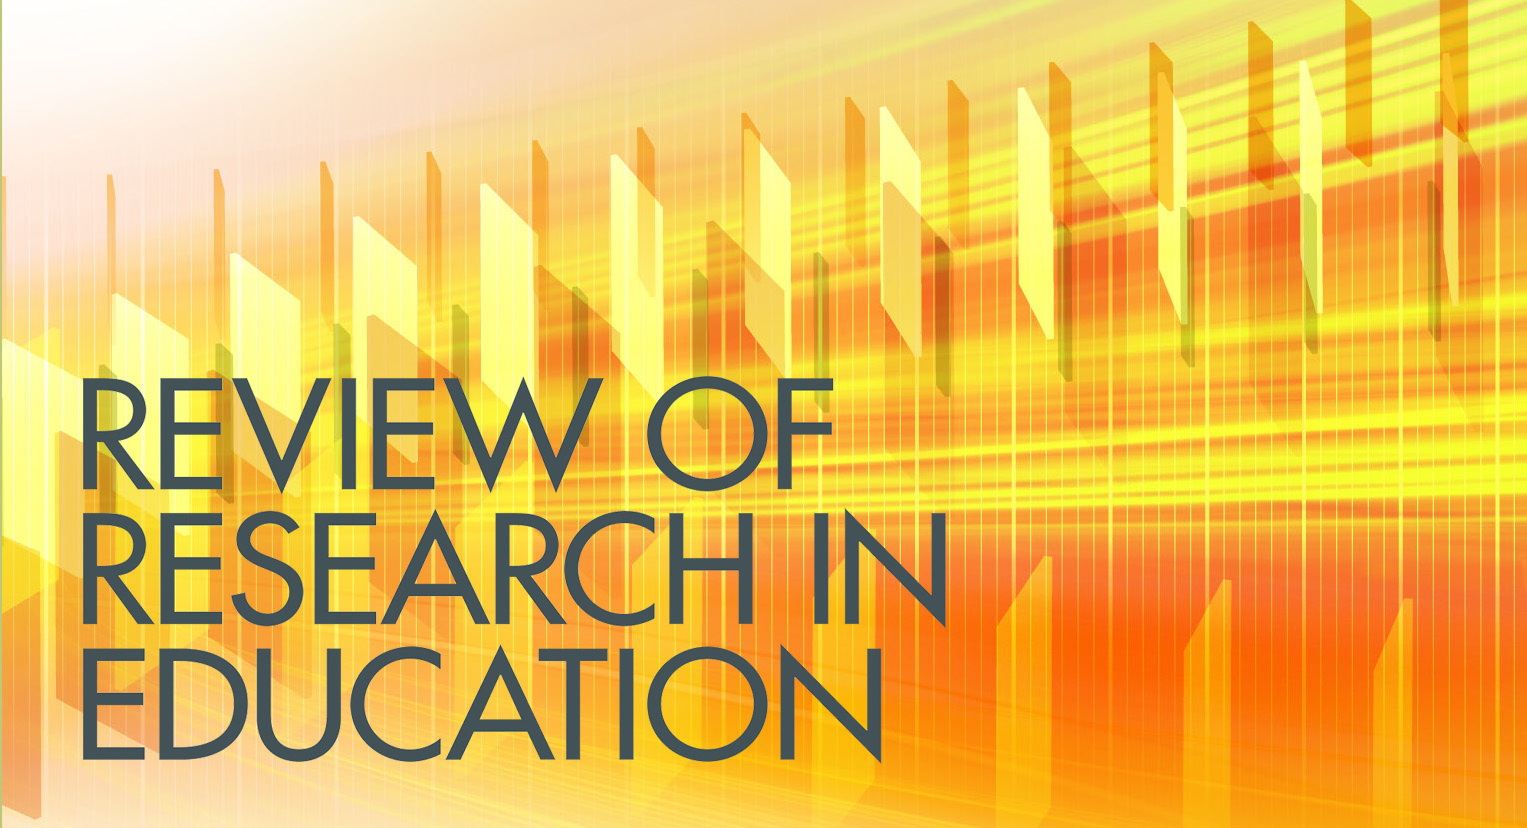 research in education best and kahn pdf